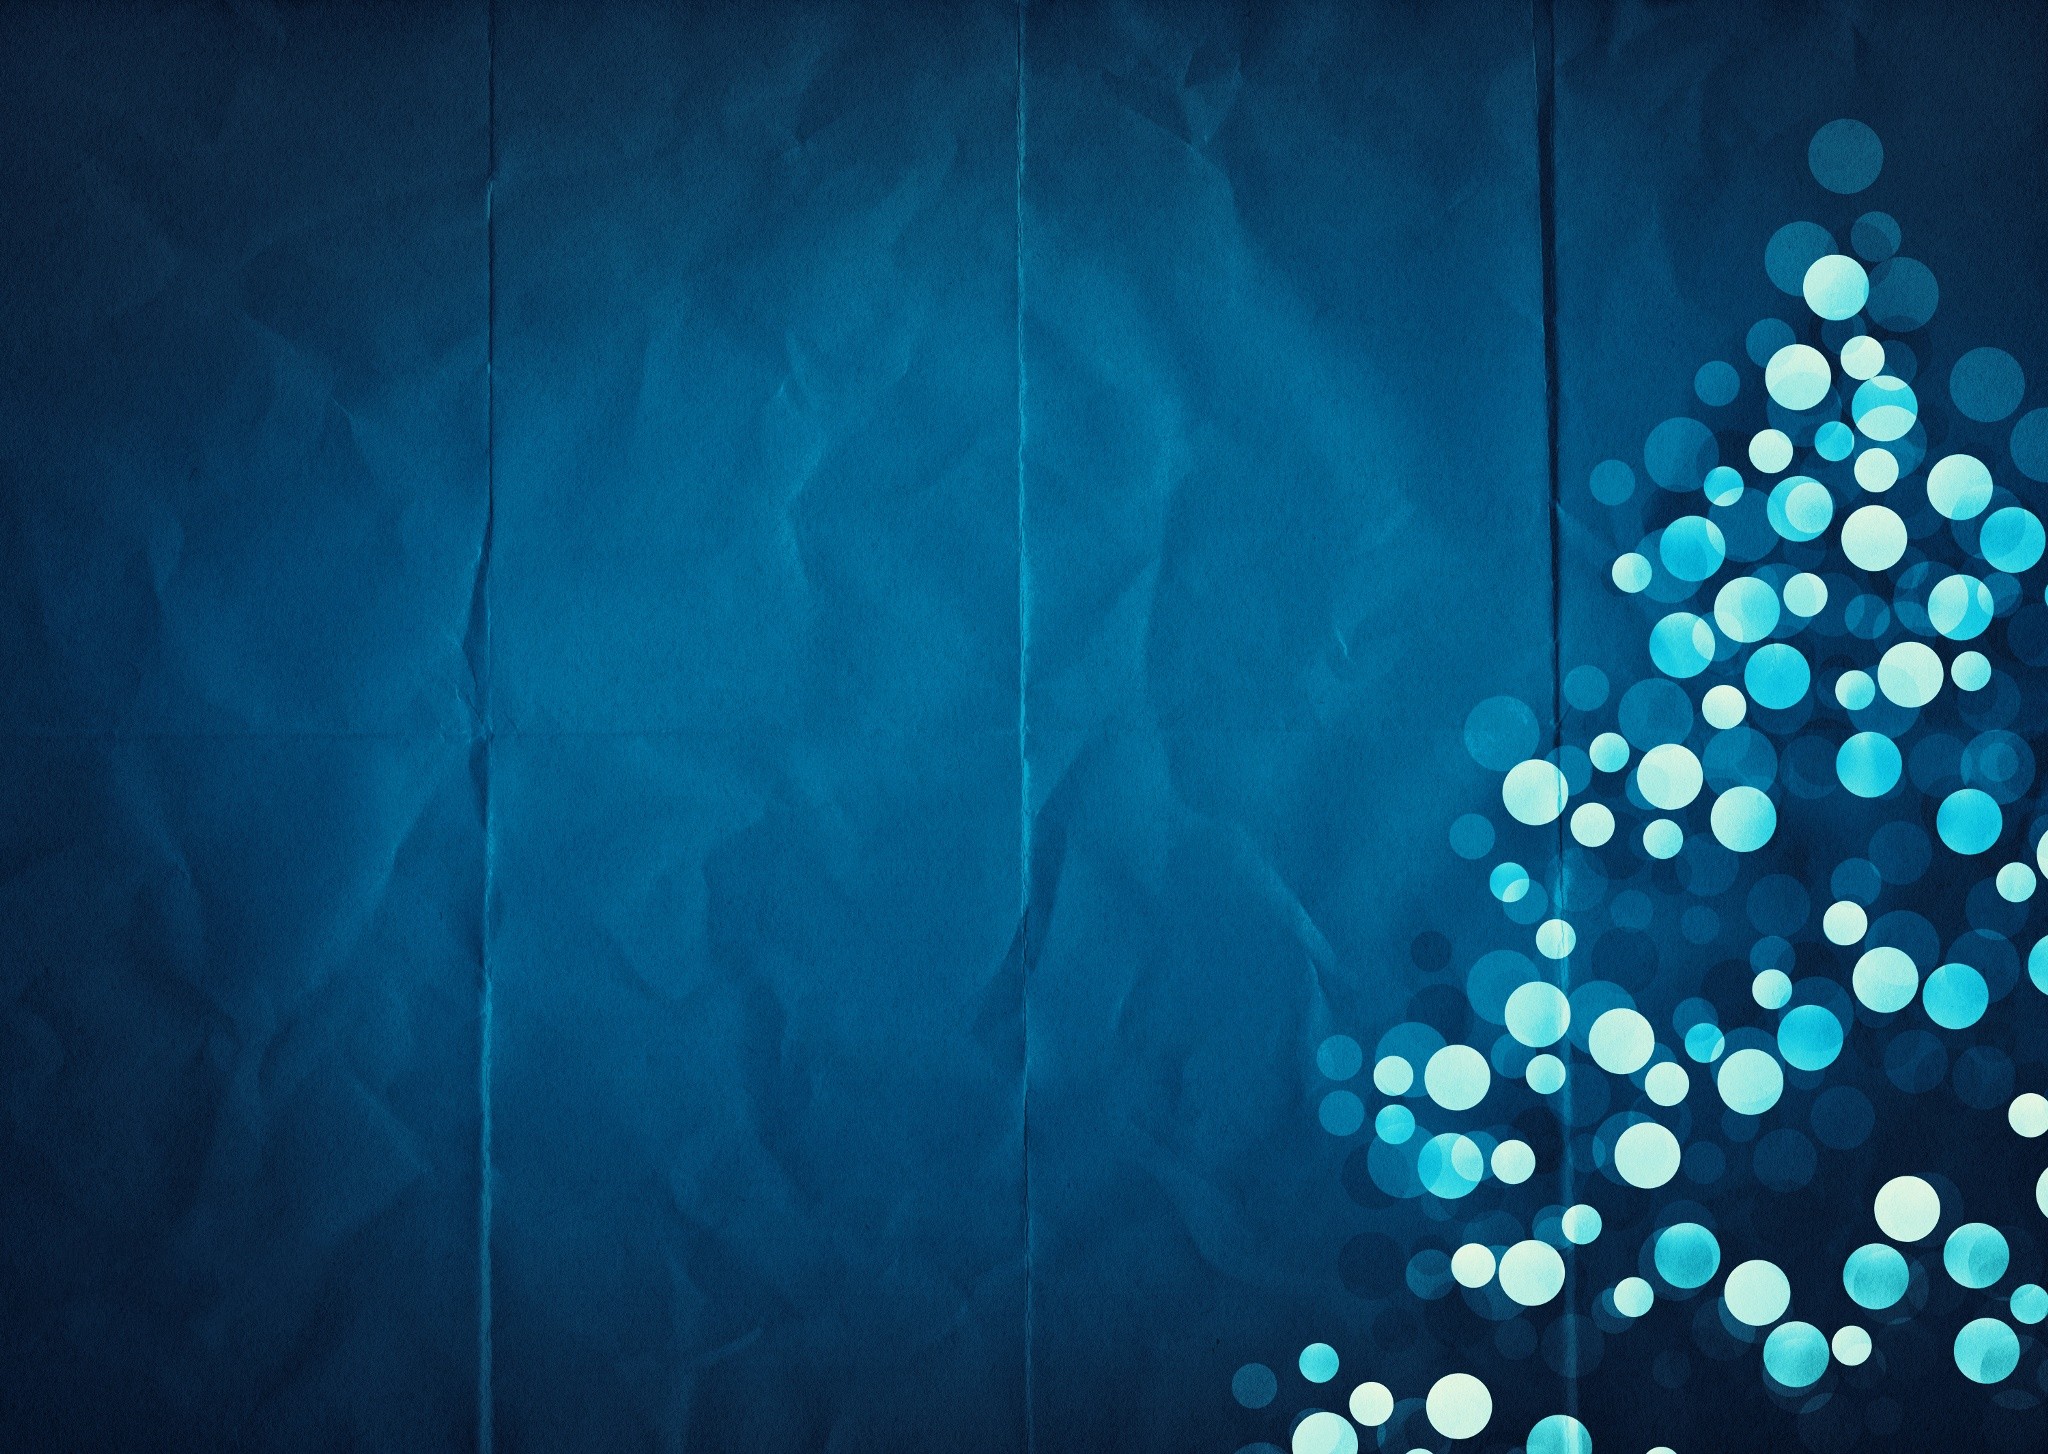 General 2048x1454 minimalism texture Christmas tree bokeh Christmas holiday digital art blue background paper simple background blue